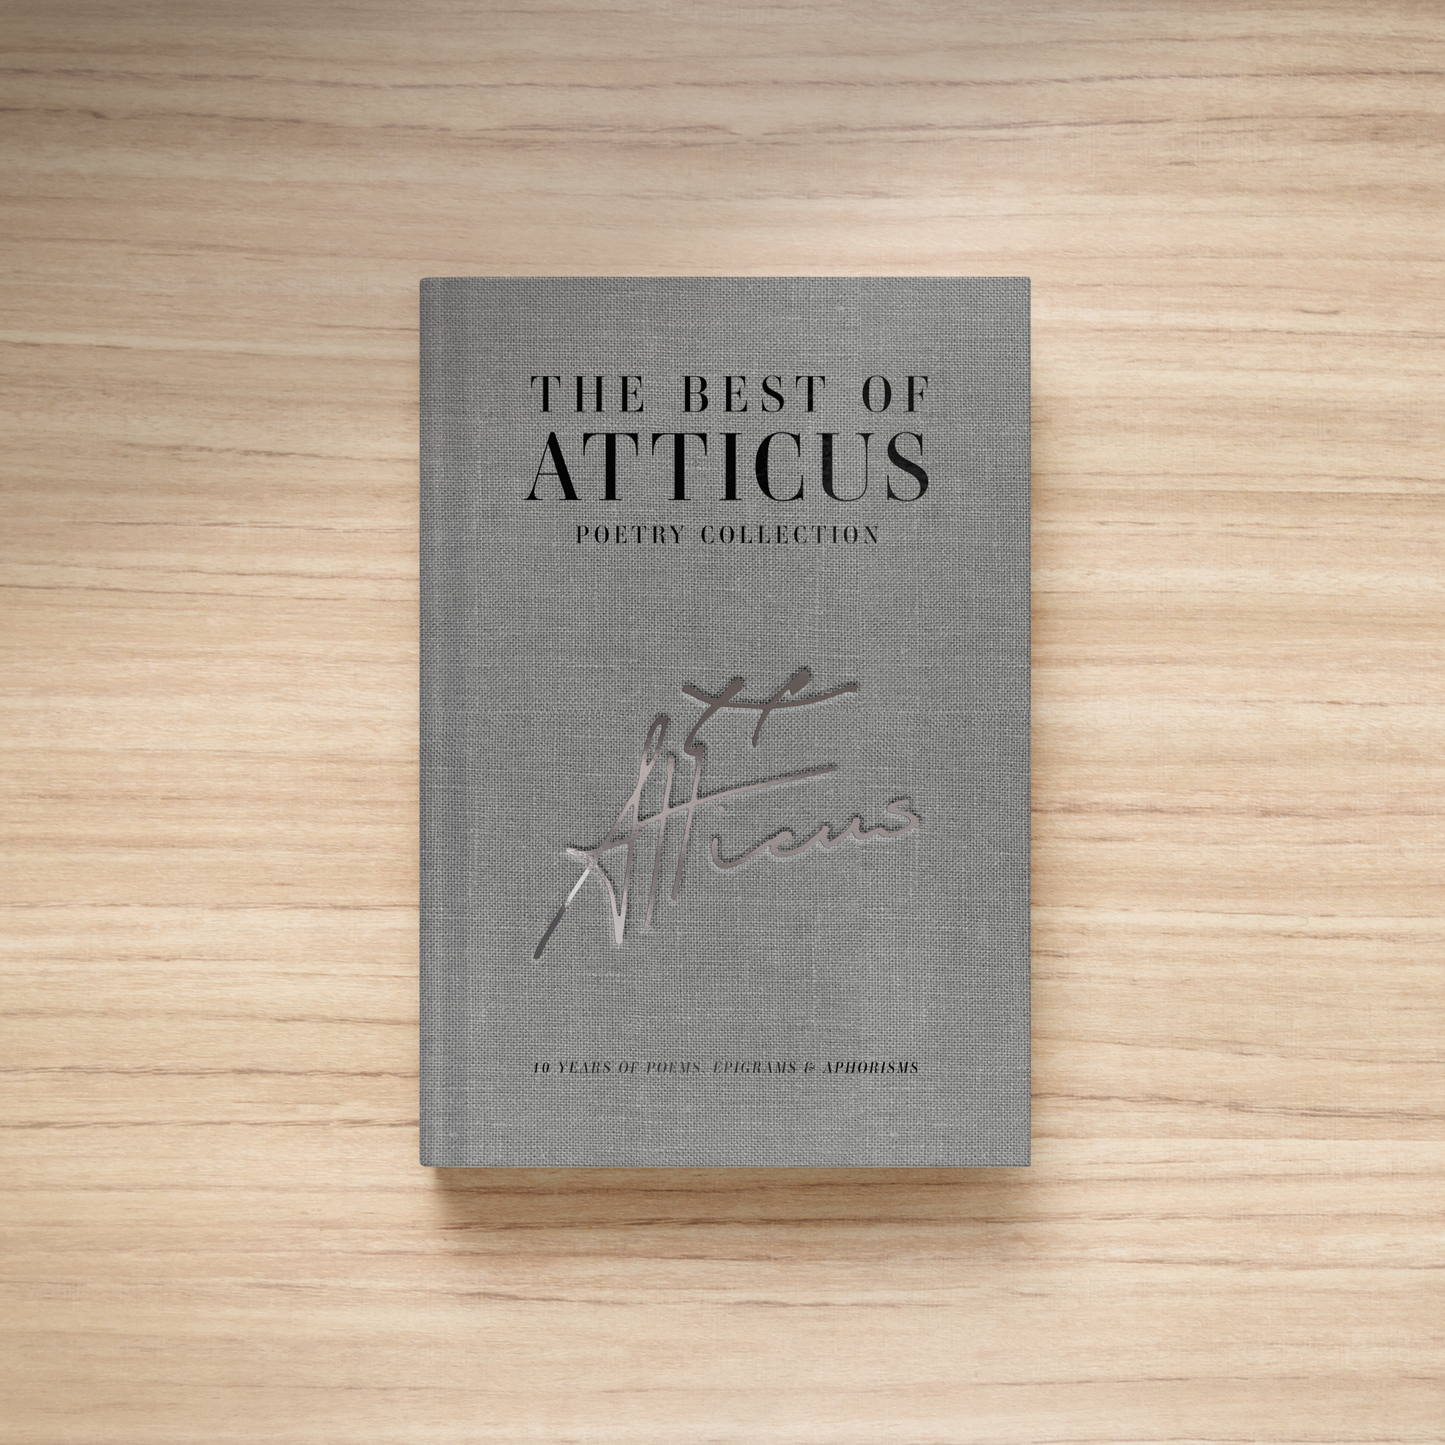 Official Signed Copy of The Best Of Atticus Poetry Collection